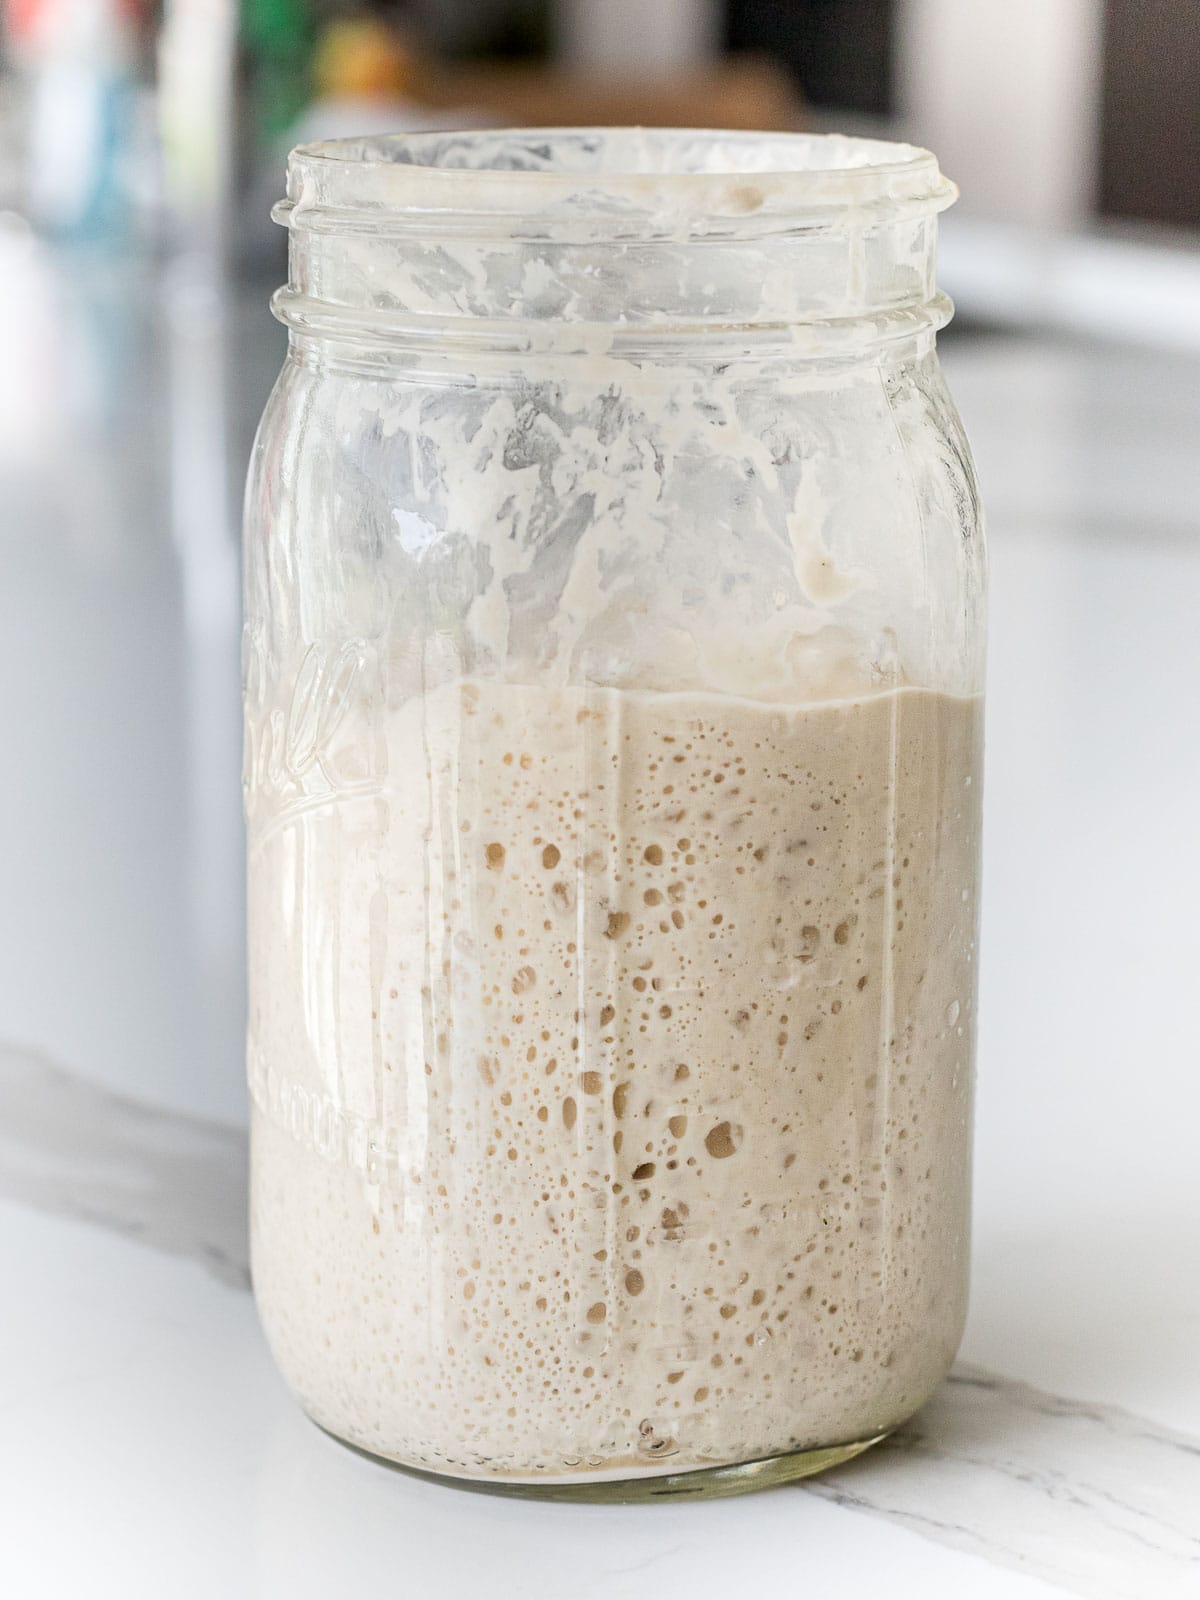 wild yeast sourdough starter showing signs of activity after a feeding